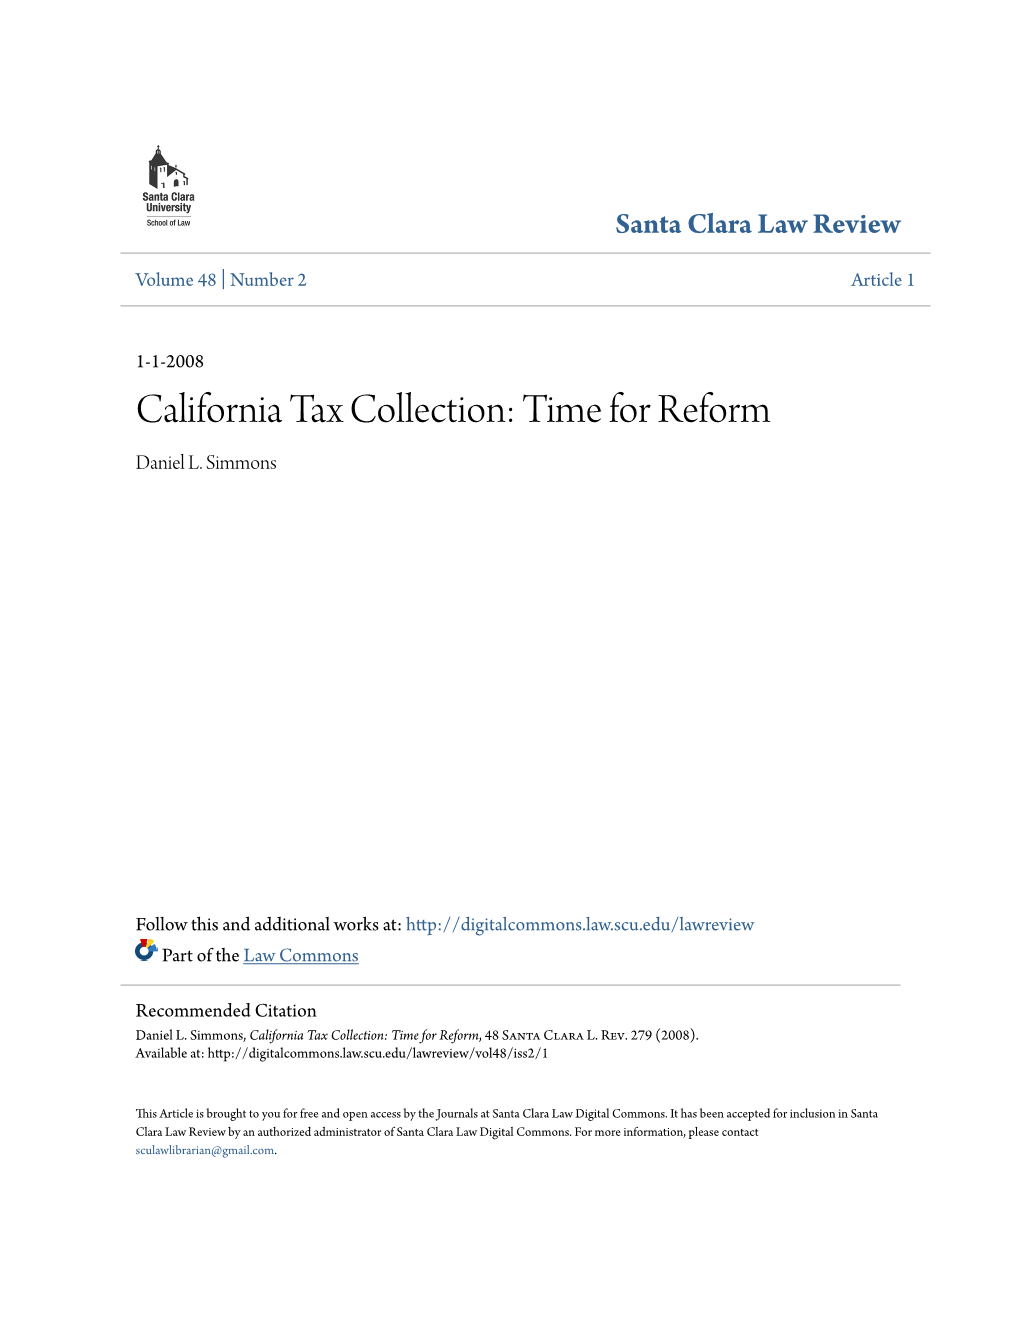 California Tax Collection: Time for Reform Daniel L